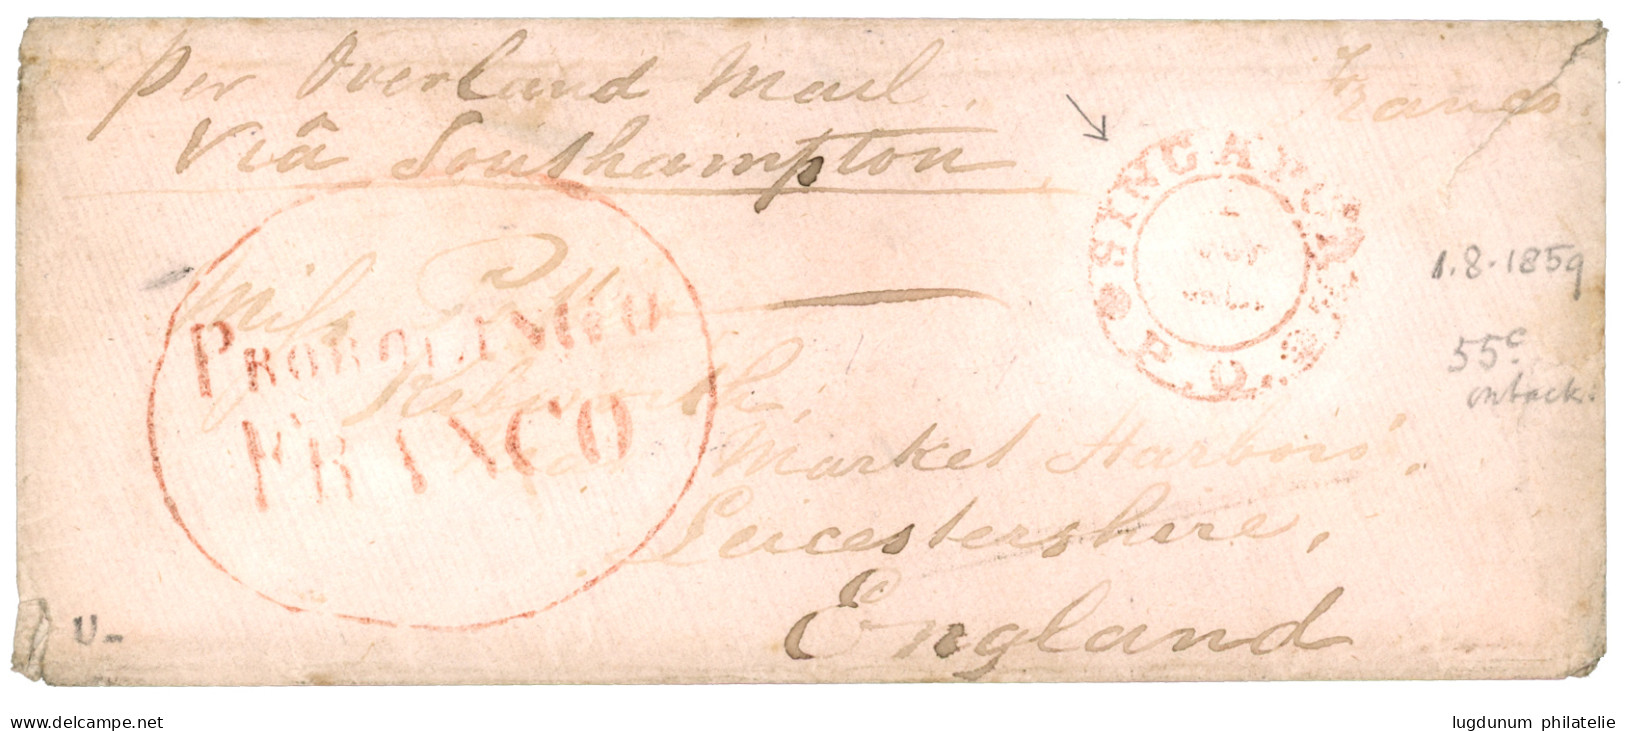 1859 SINGAPORE P.O. In Red + PROBOLINGO FRANCO Red  On Envelope "OVERLAND MAIL" To ENGLAND. NBVV Certificate (2000). Rar - Netherlands Indies